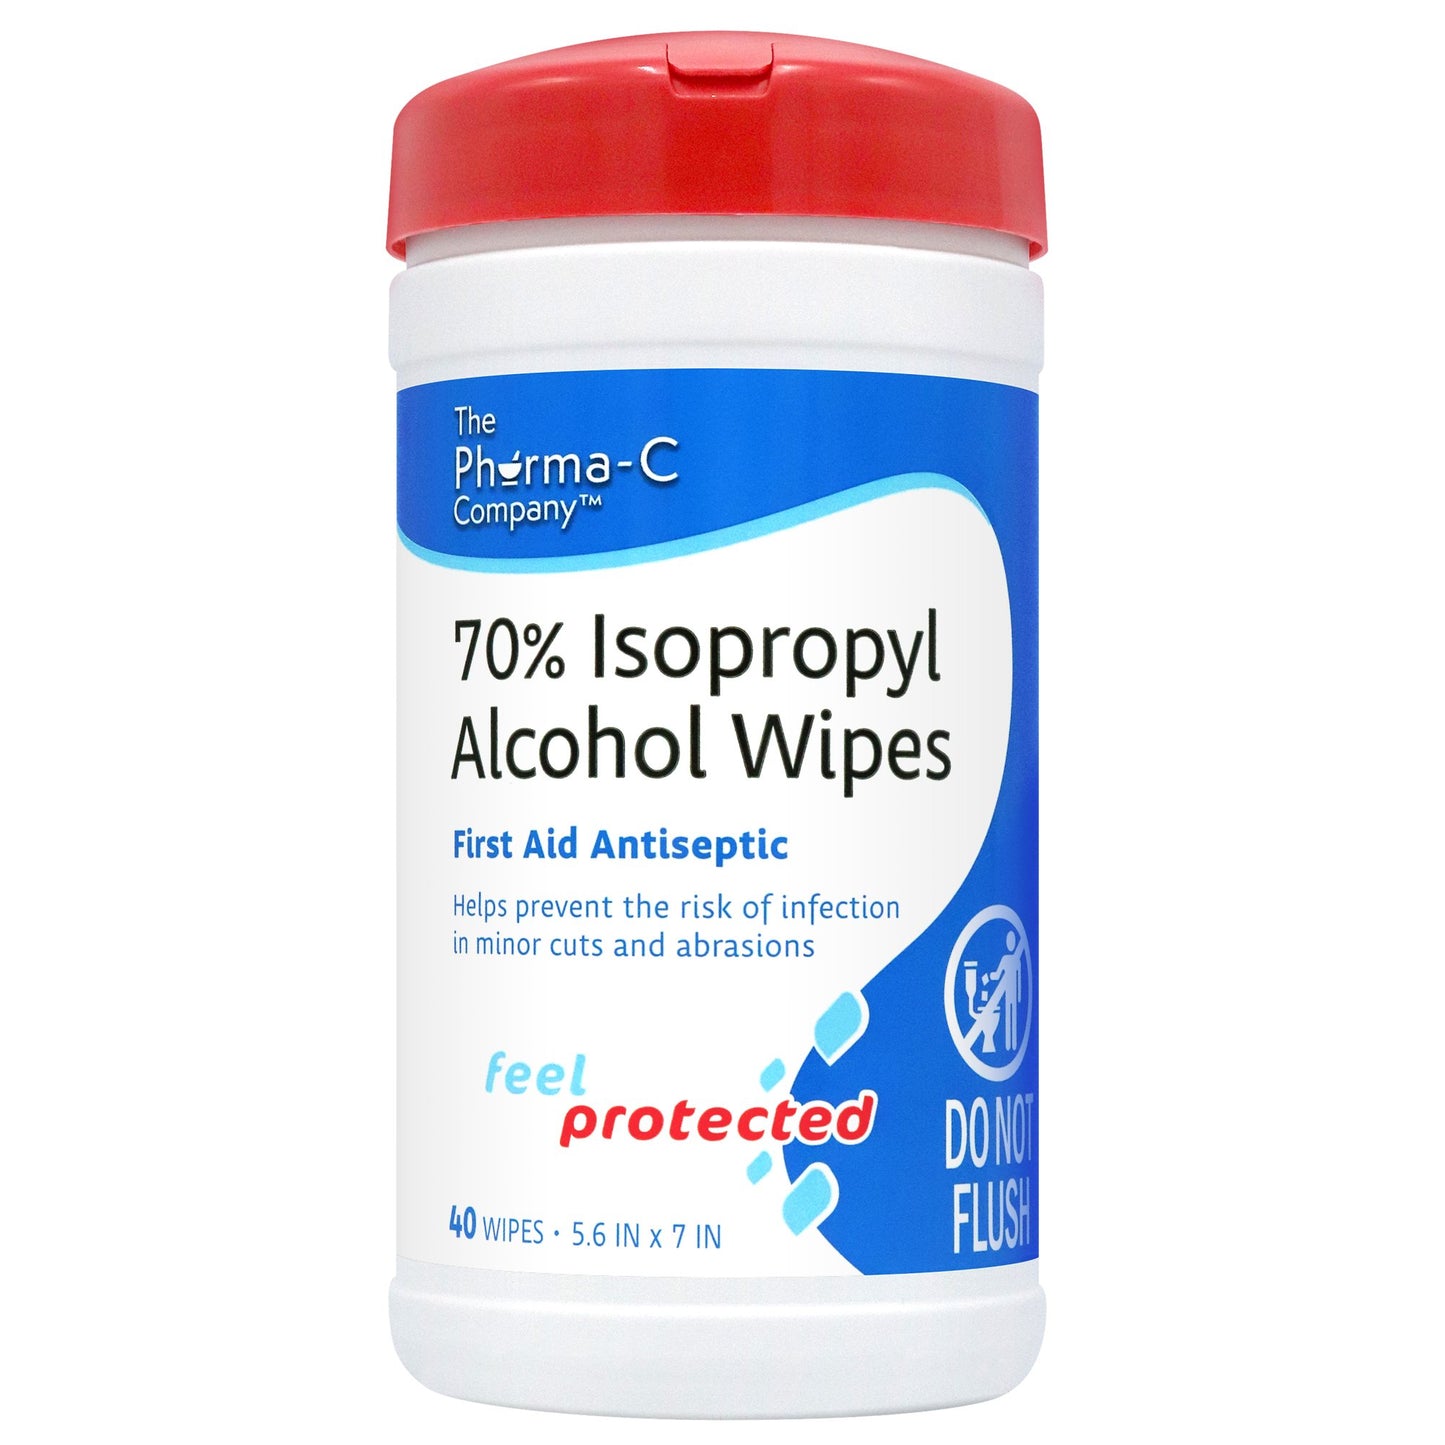 Pharma-C-Wipes Isopropyl Alcohol Antiseptic, 40 Count Canister